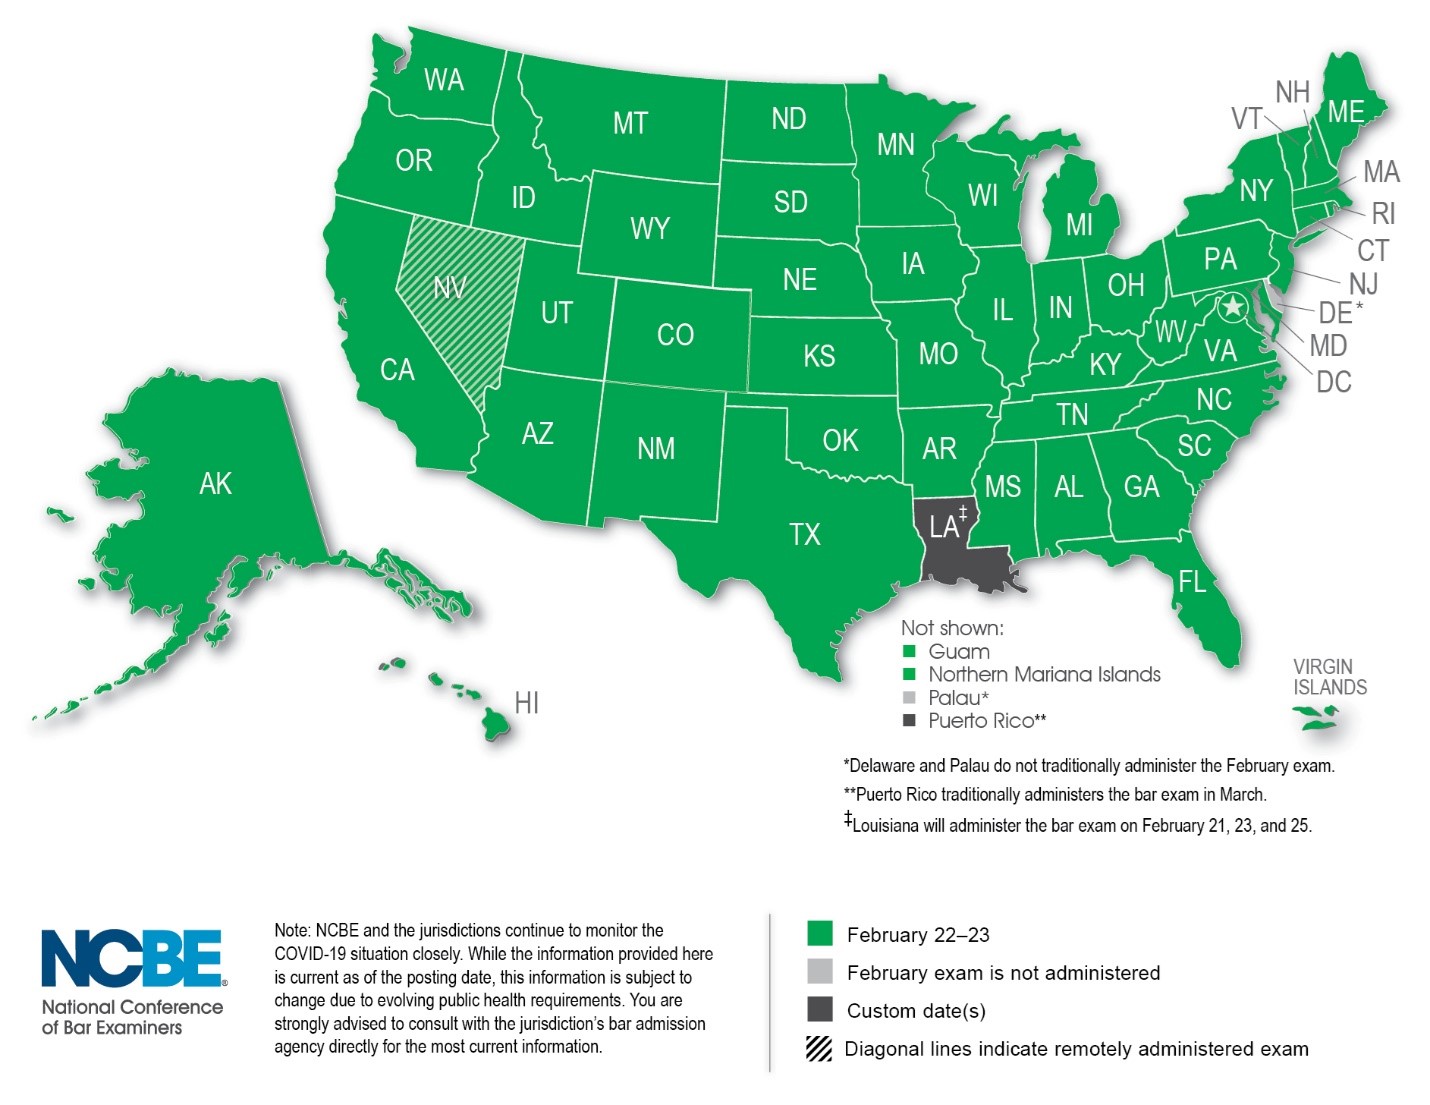 map of state taking the bar exam in person in February 2022